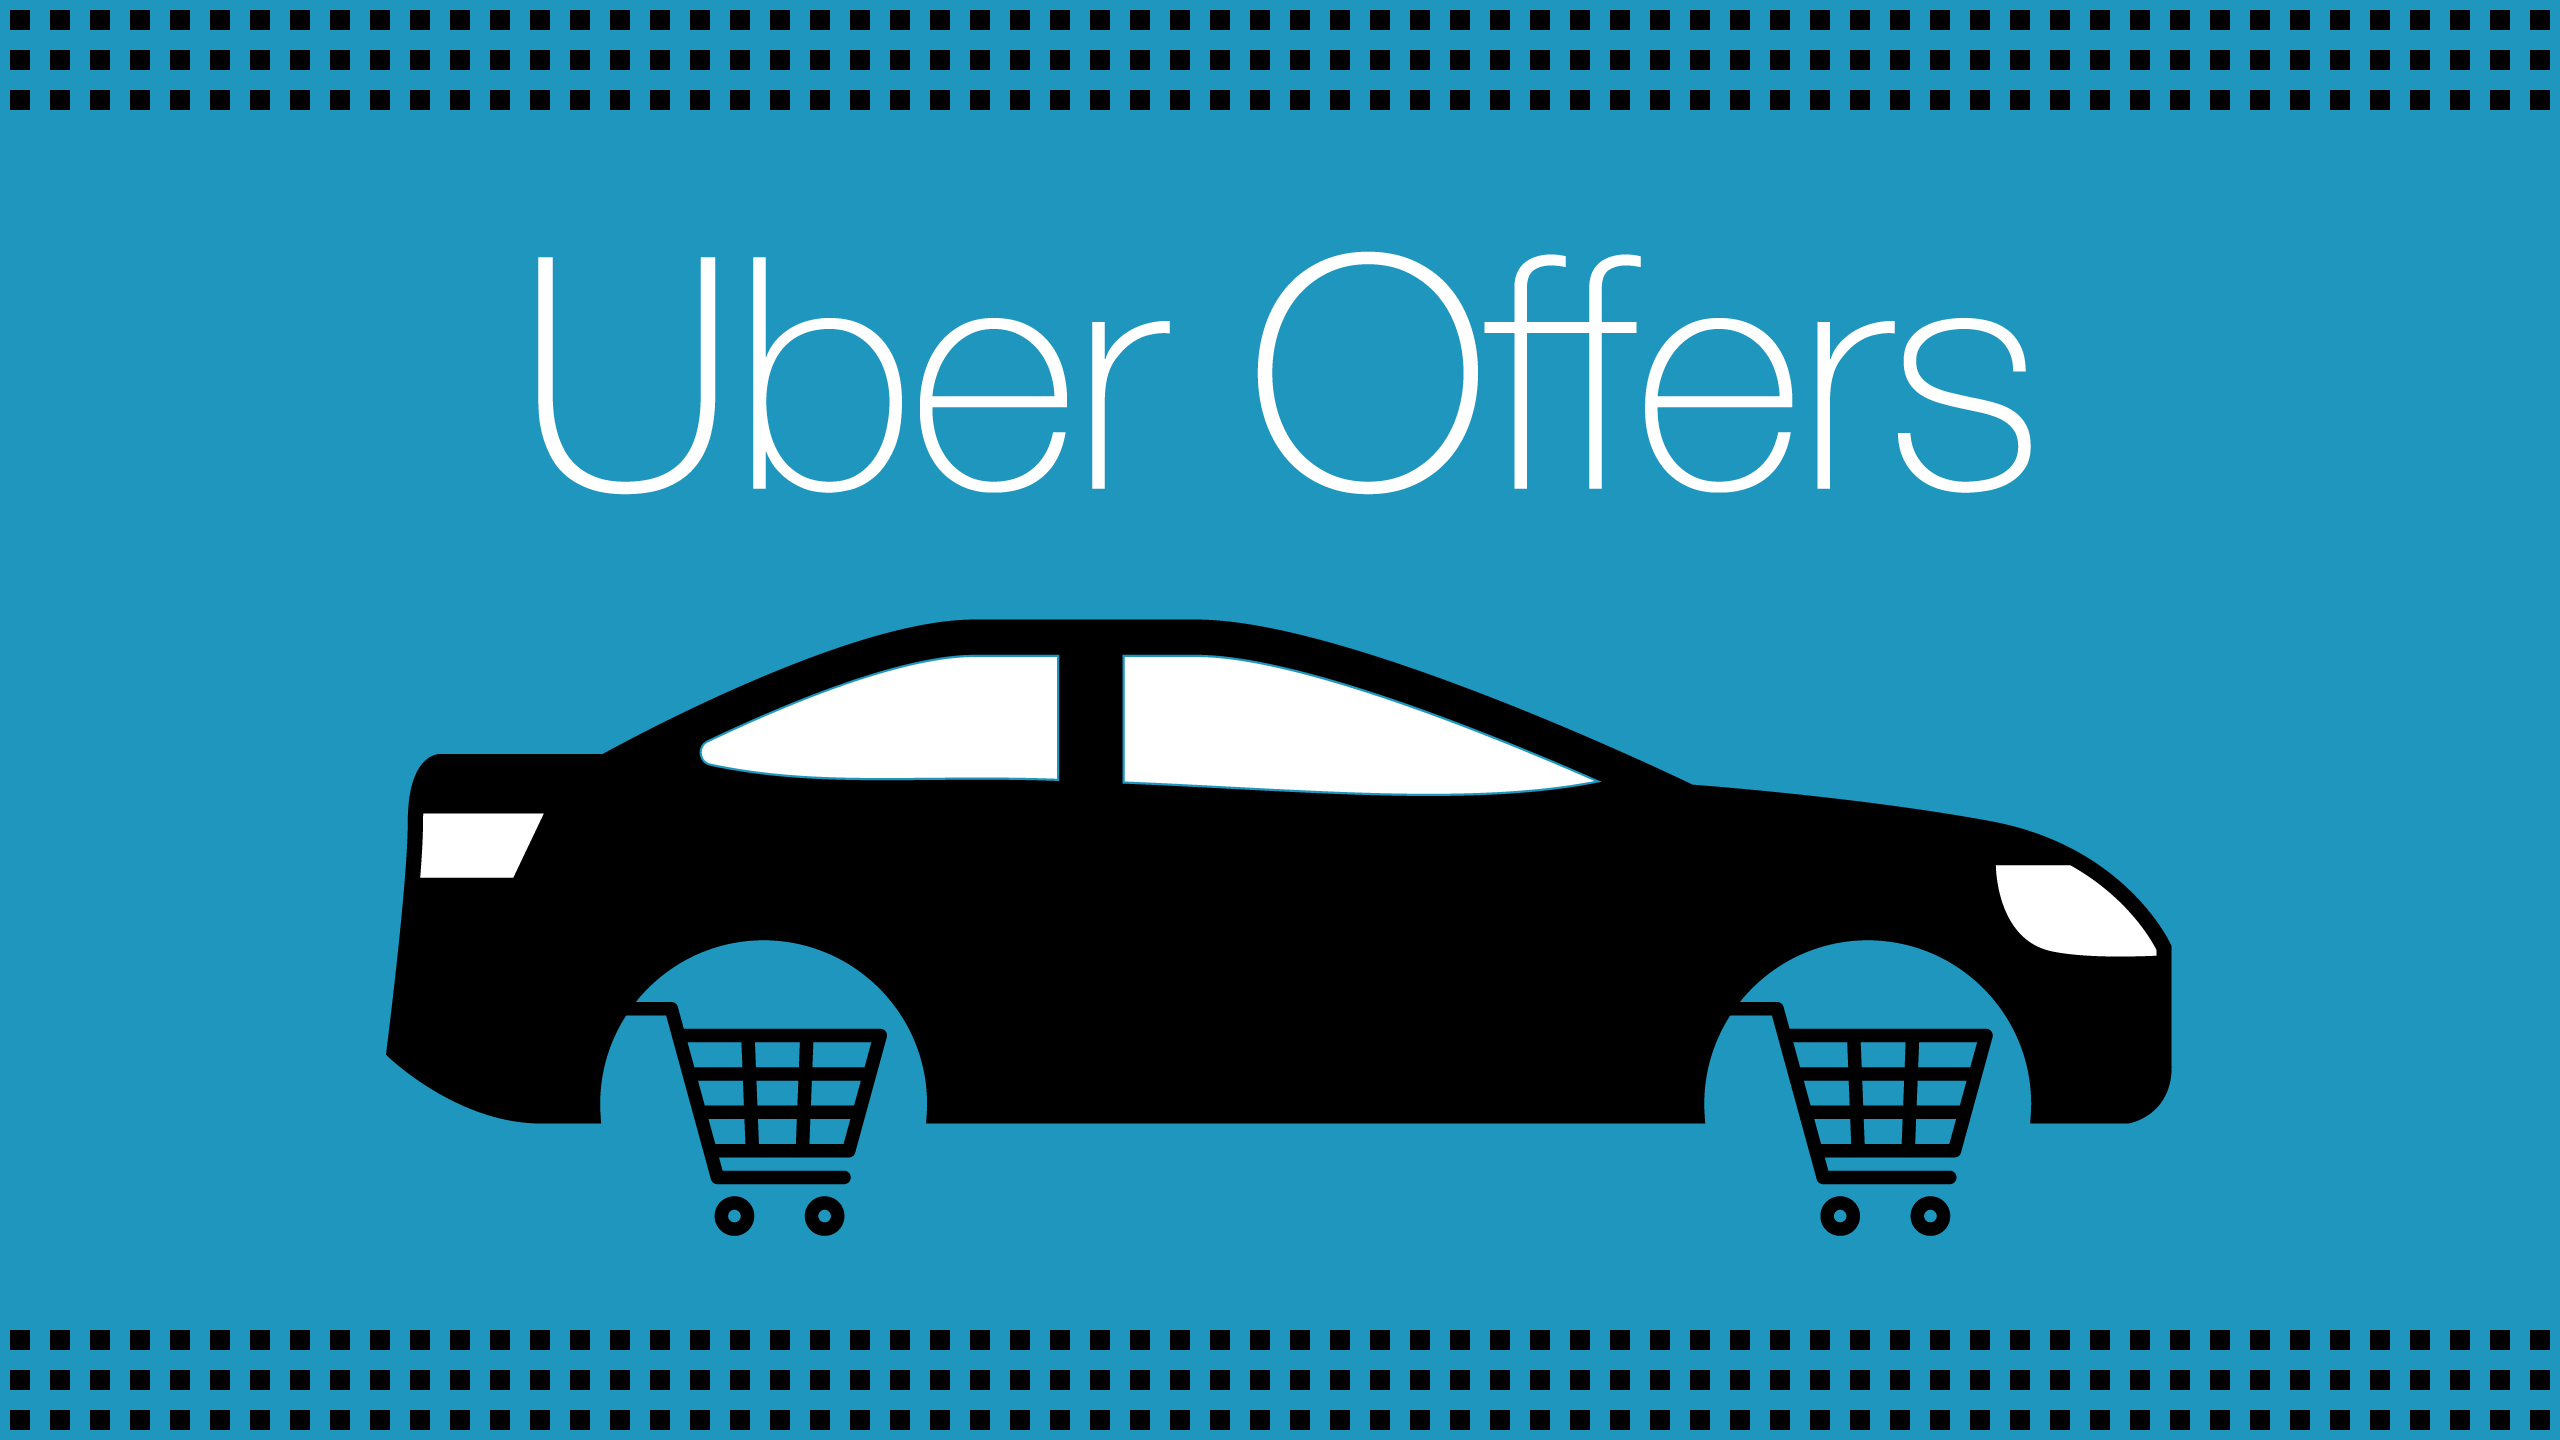 Users offers